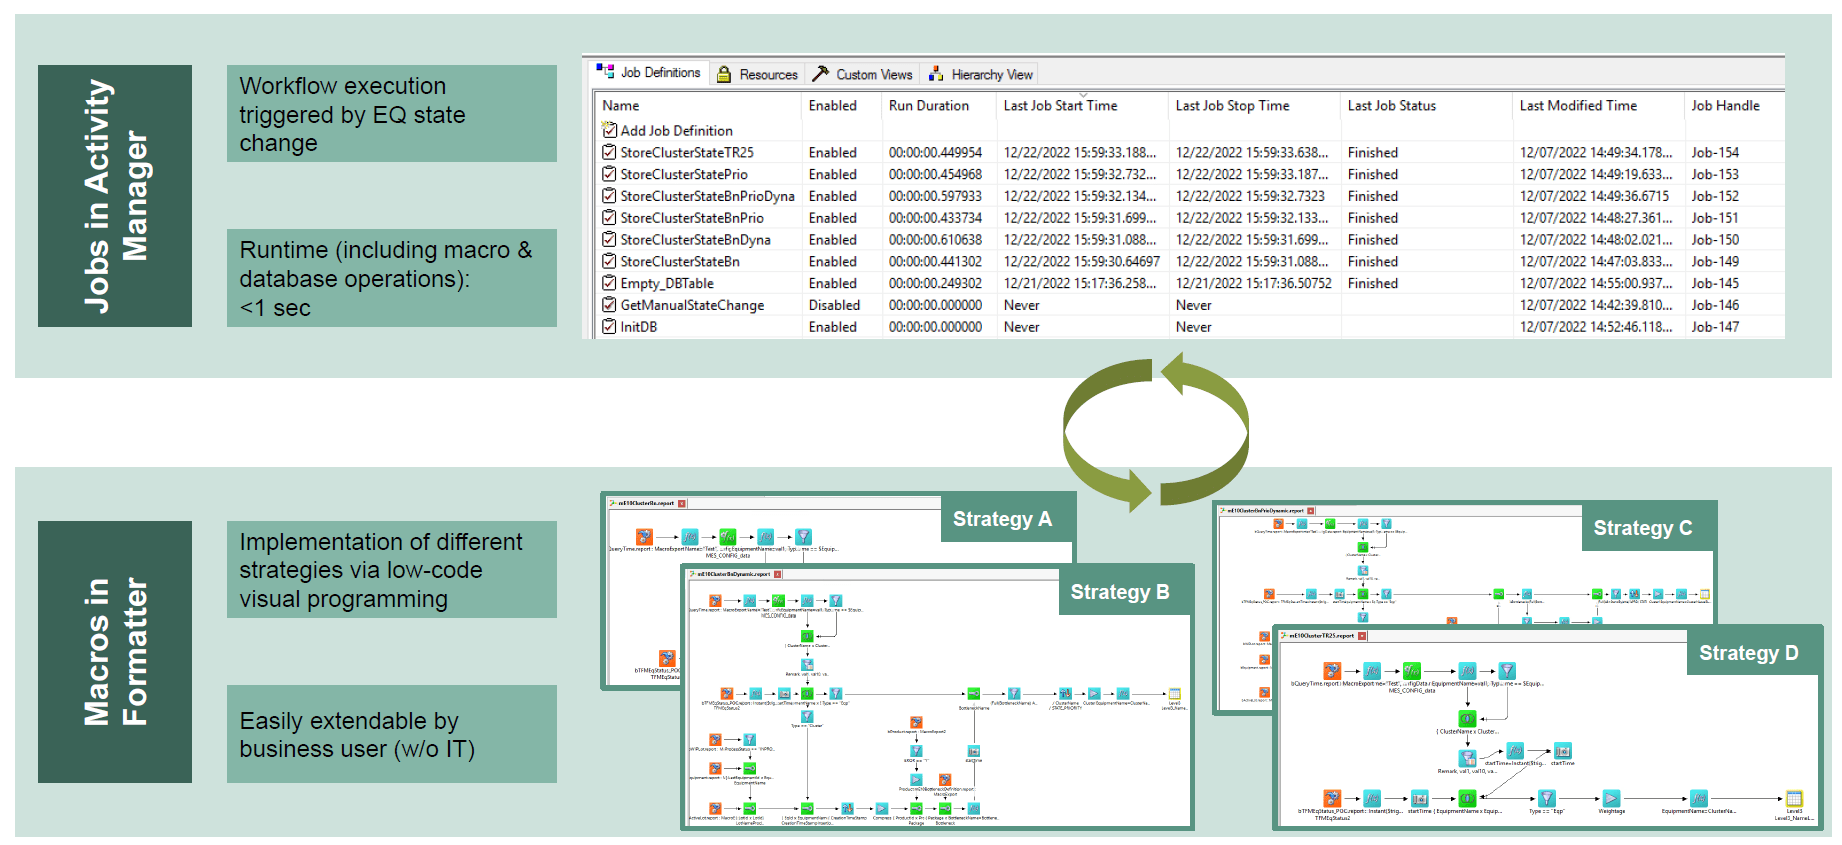 Figure 1: Activity Manager extracts factory data, runs APF reports to compute results for each scenario, and stores those results to an external database